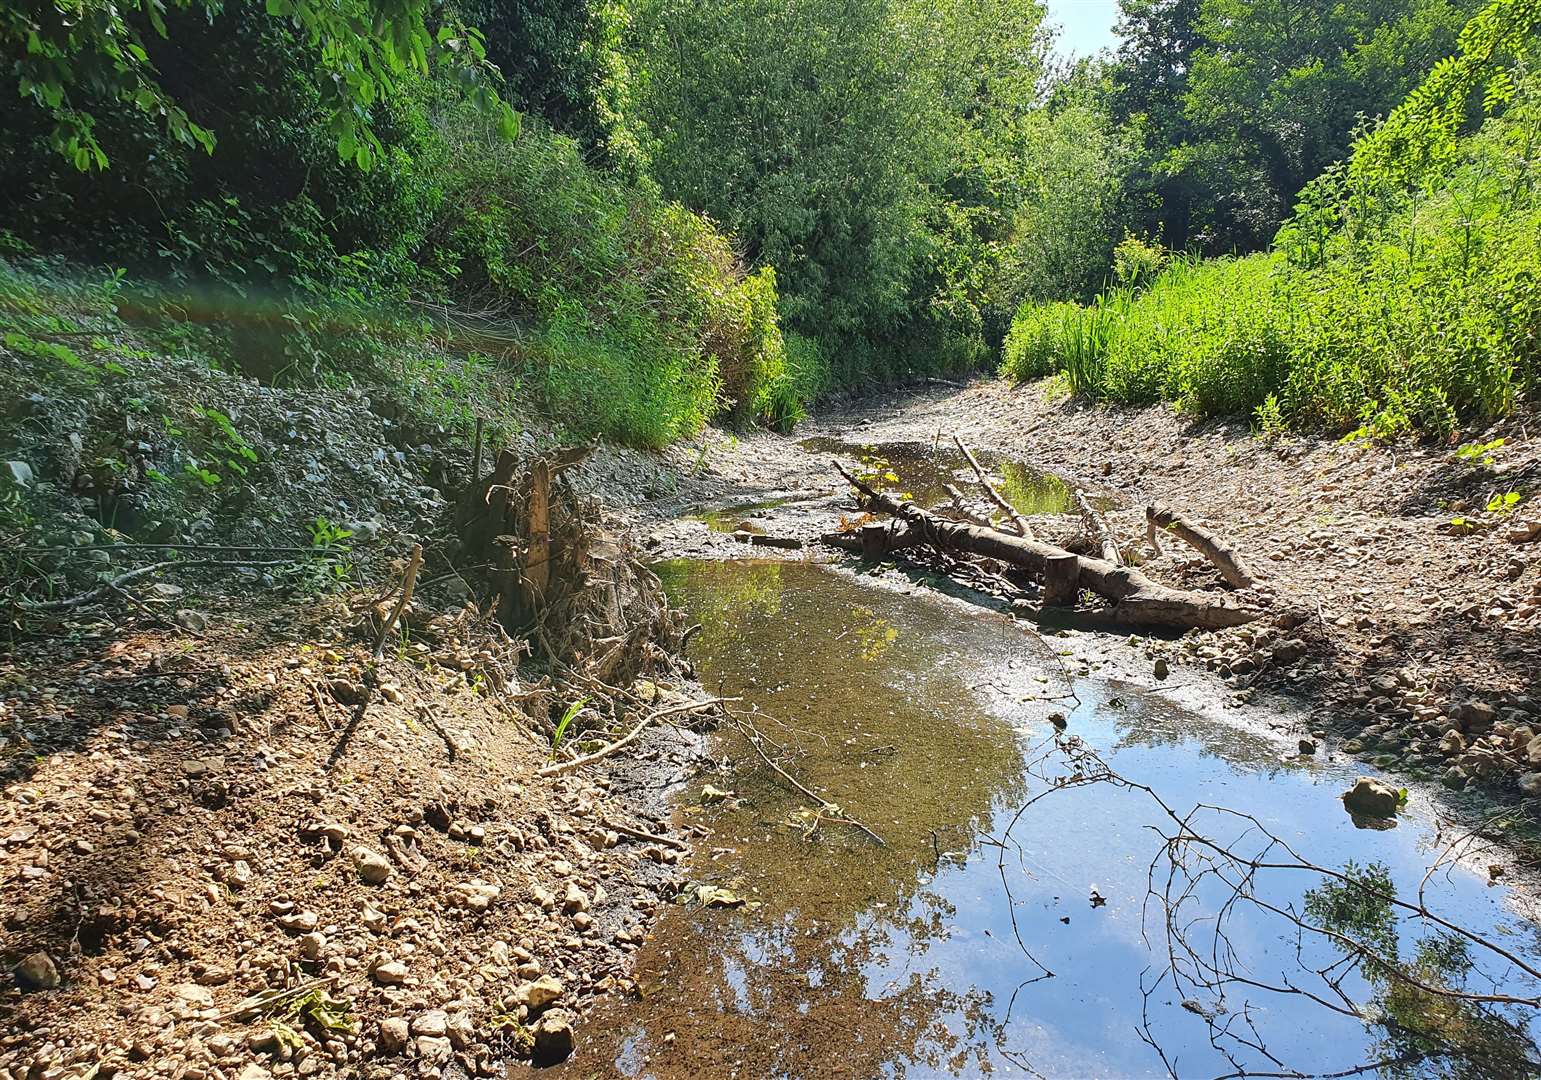 The River Darent restoration forms part of the council's £5m shake up to the Acacia Hall complex. Photo: South East Rivers Trust